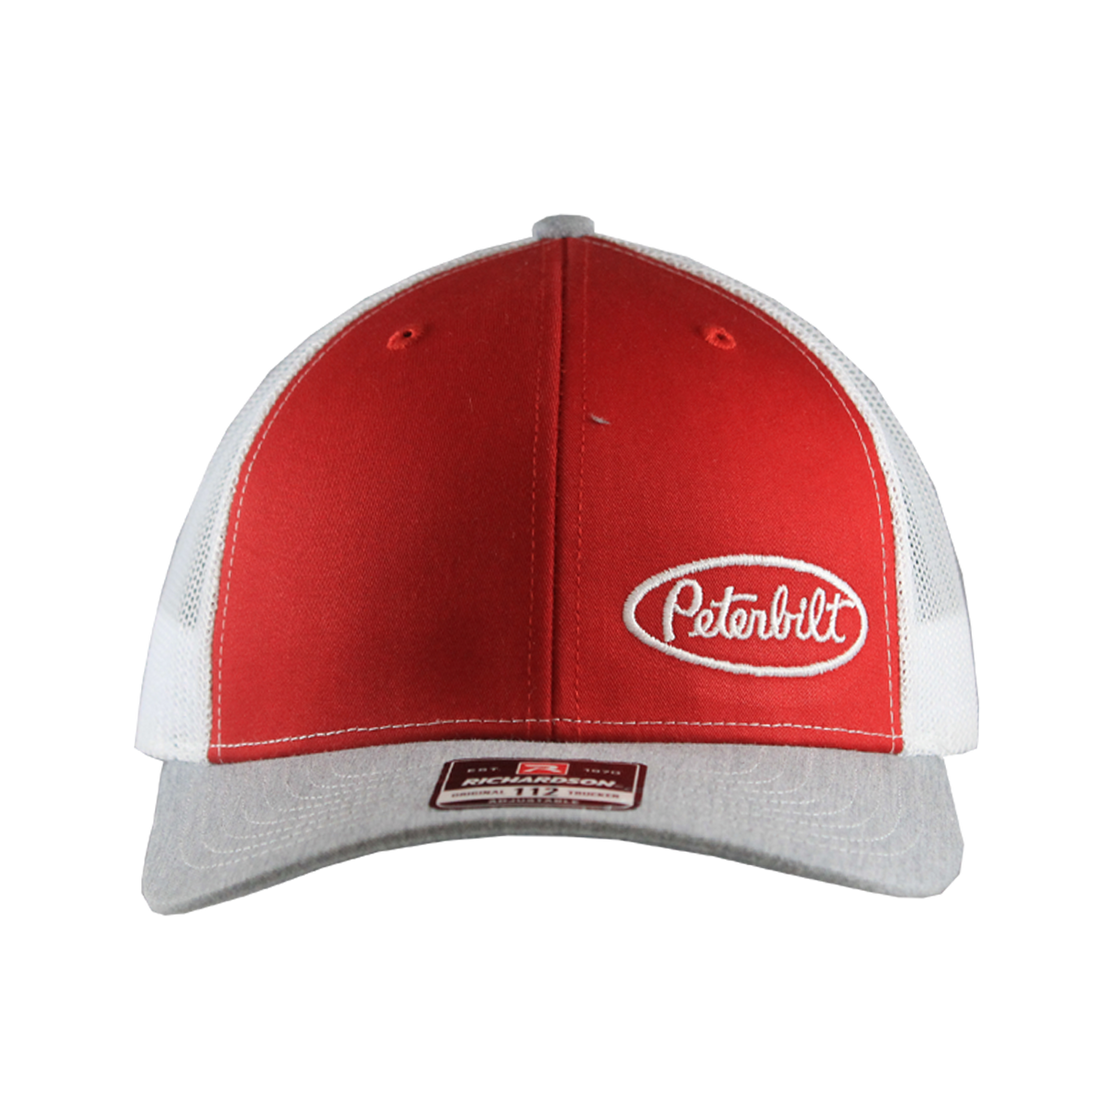 Classic Gray and Red Hat with White Peterbilt Logo Mesh Trucker Cap ...